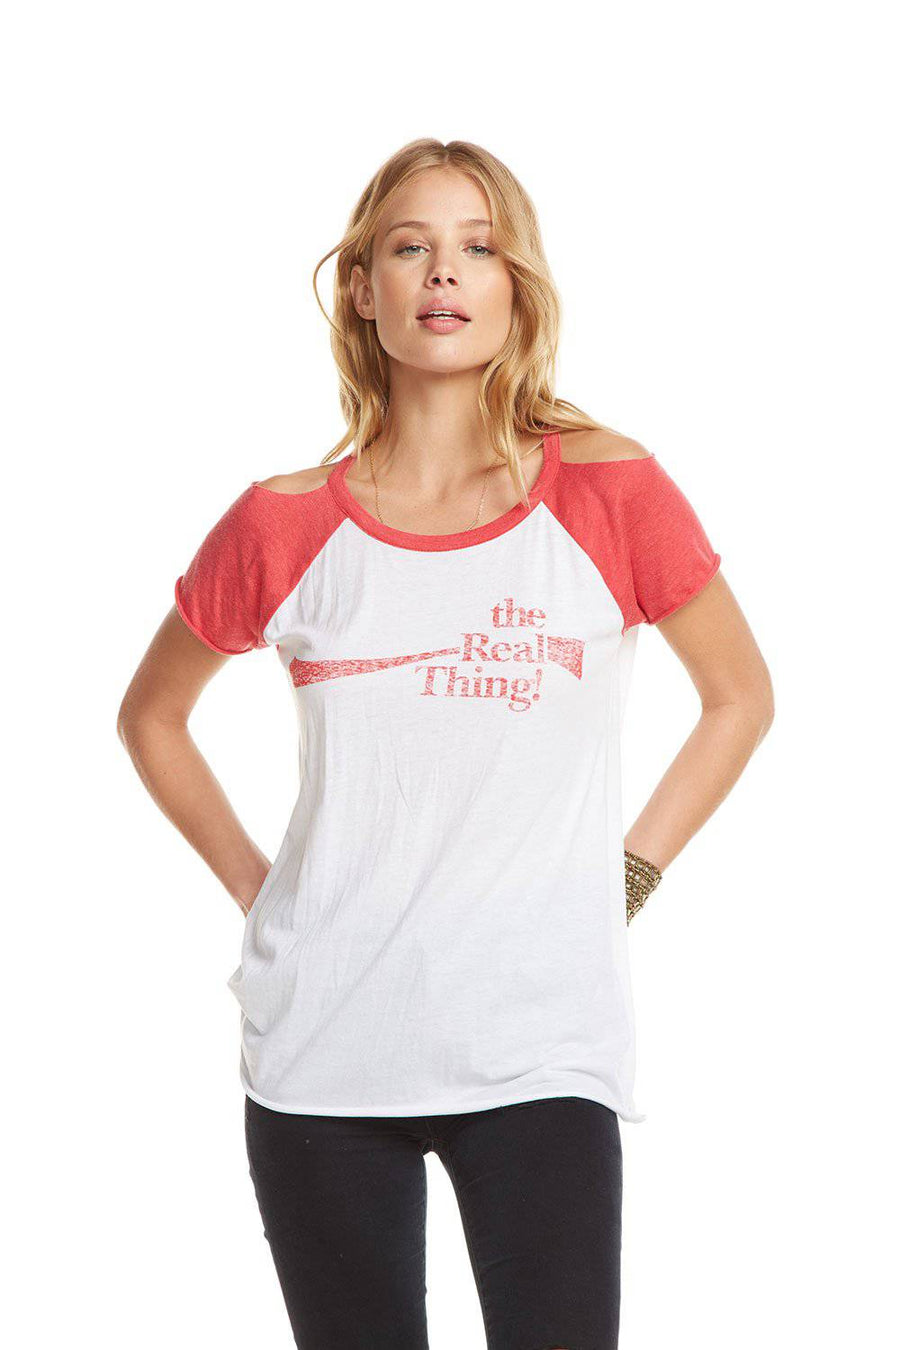 COCA COLA - THE REAL THING WOMENS chaserbrand